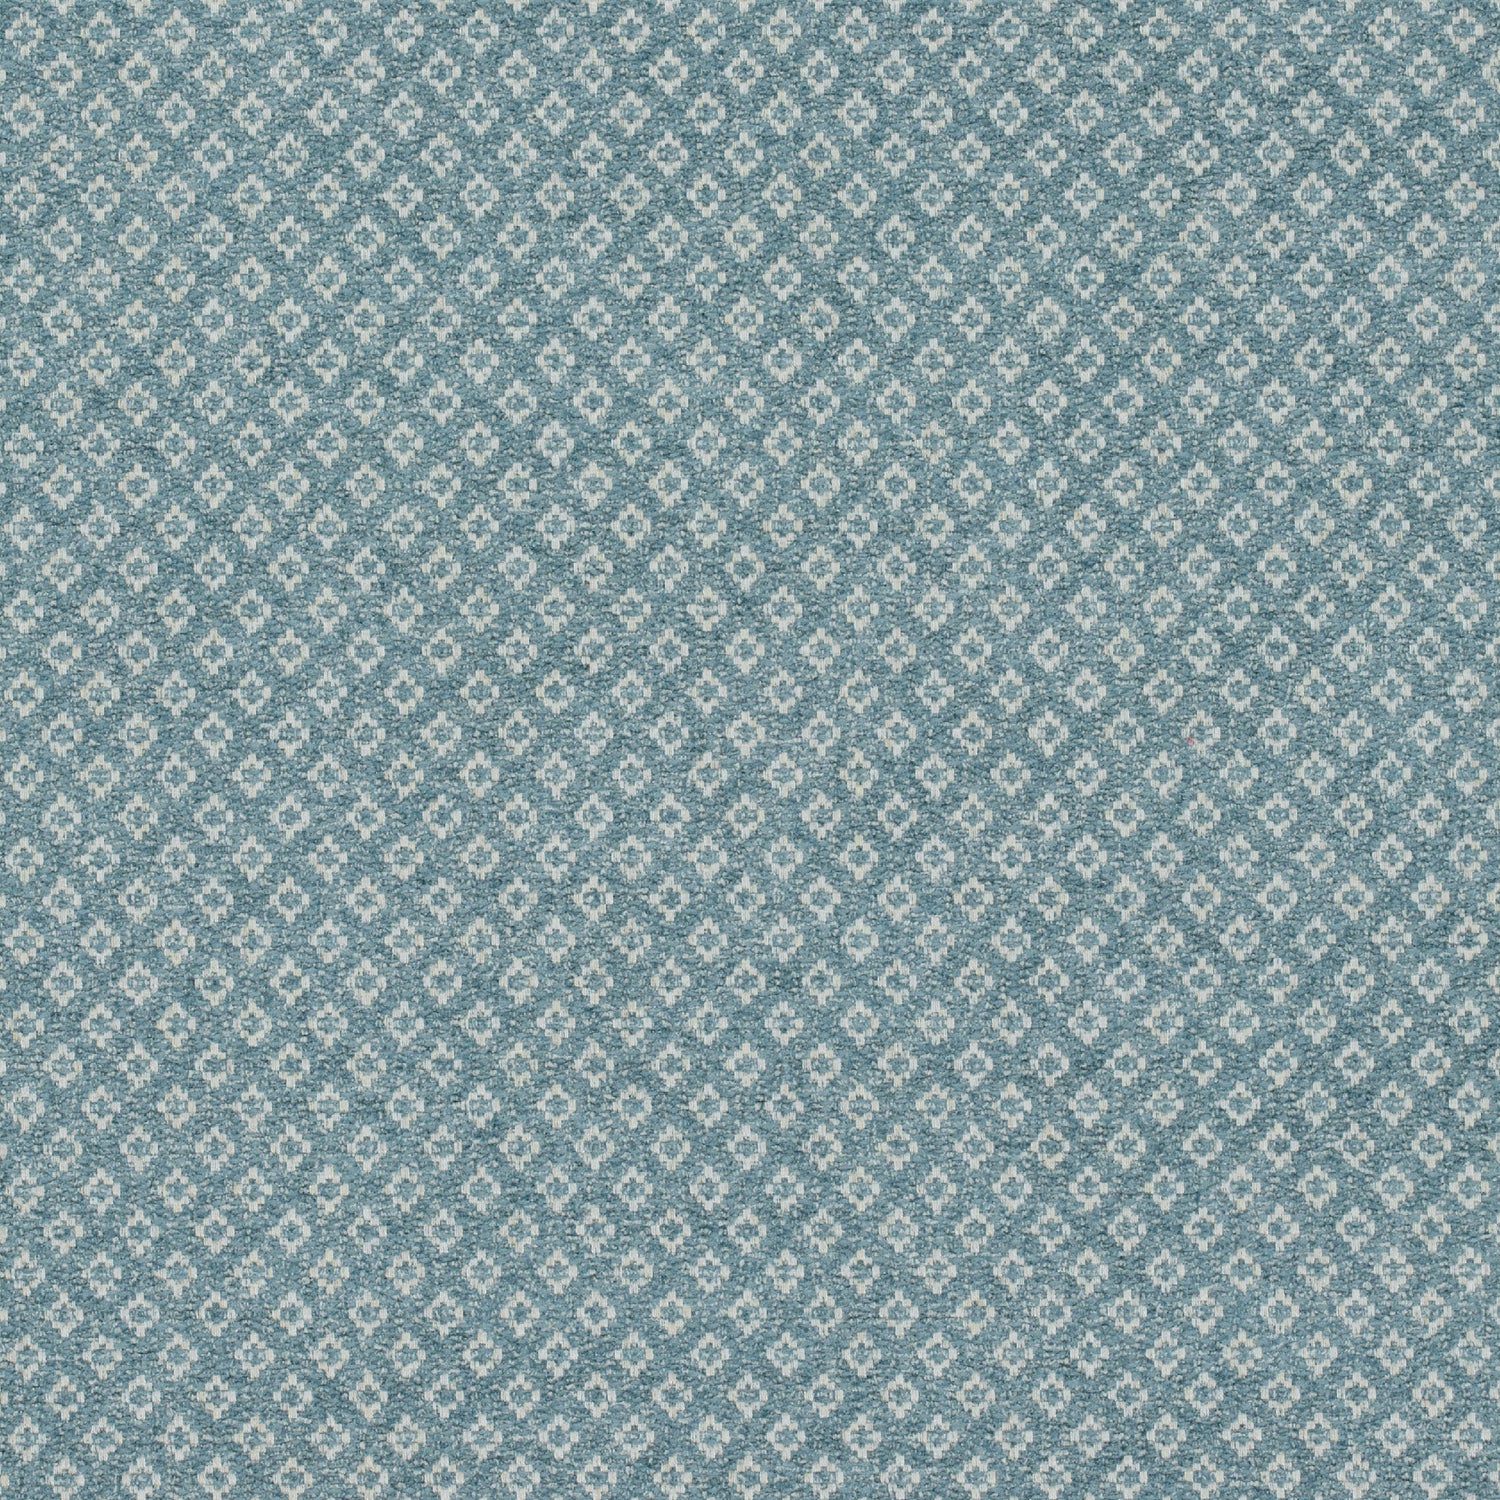 Claudio fabric in aqua color - pattern number AW72998 - by Anna French in the Manor collection